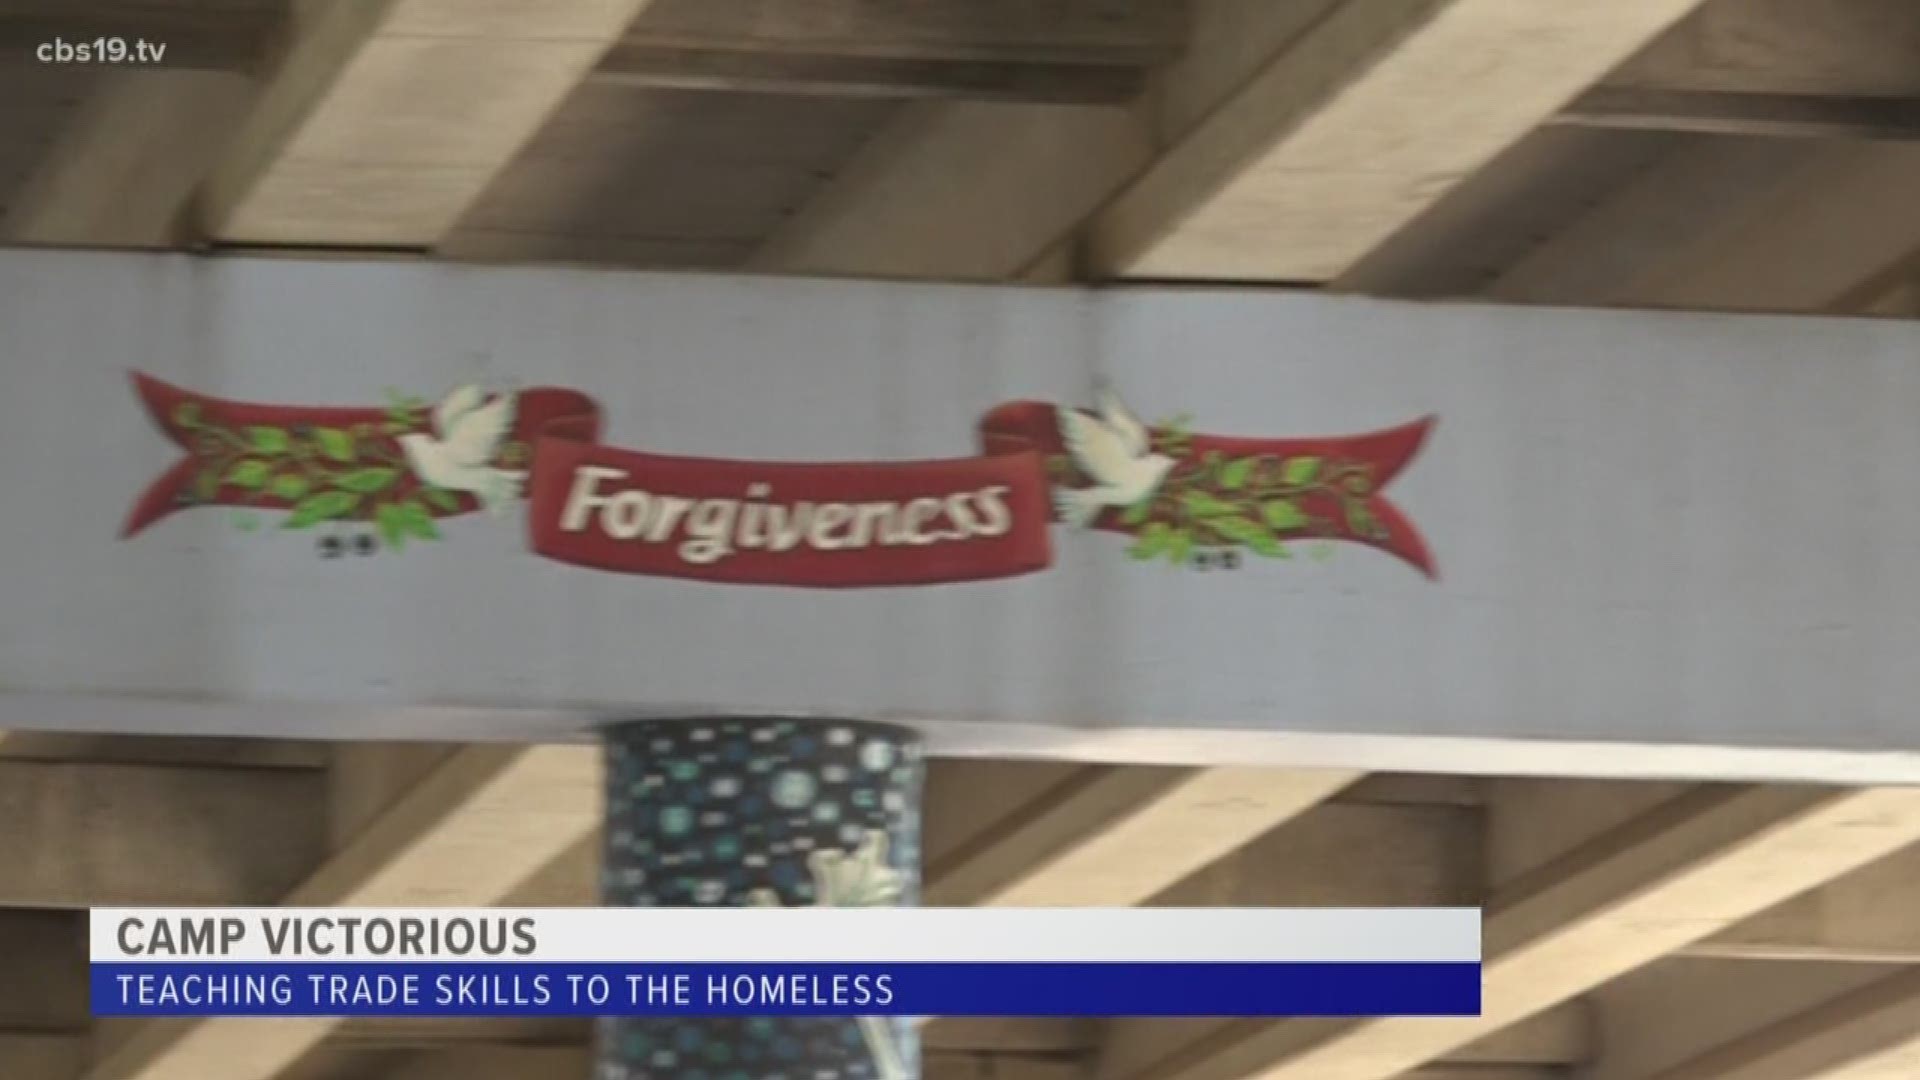 Camp Victorious to teach trade skills to homeless